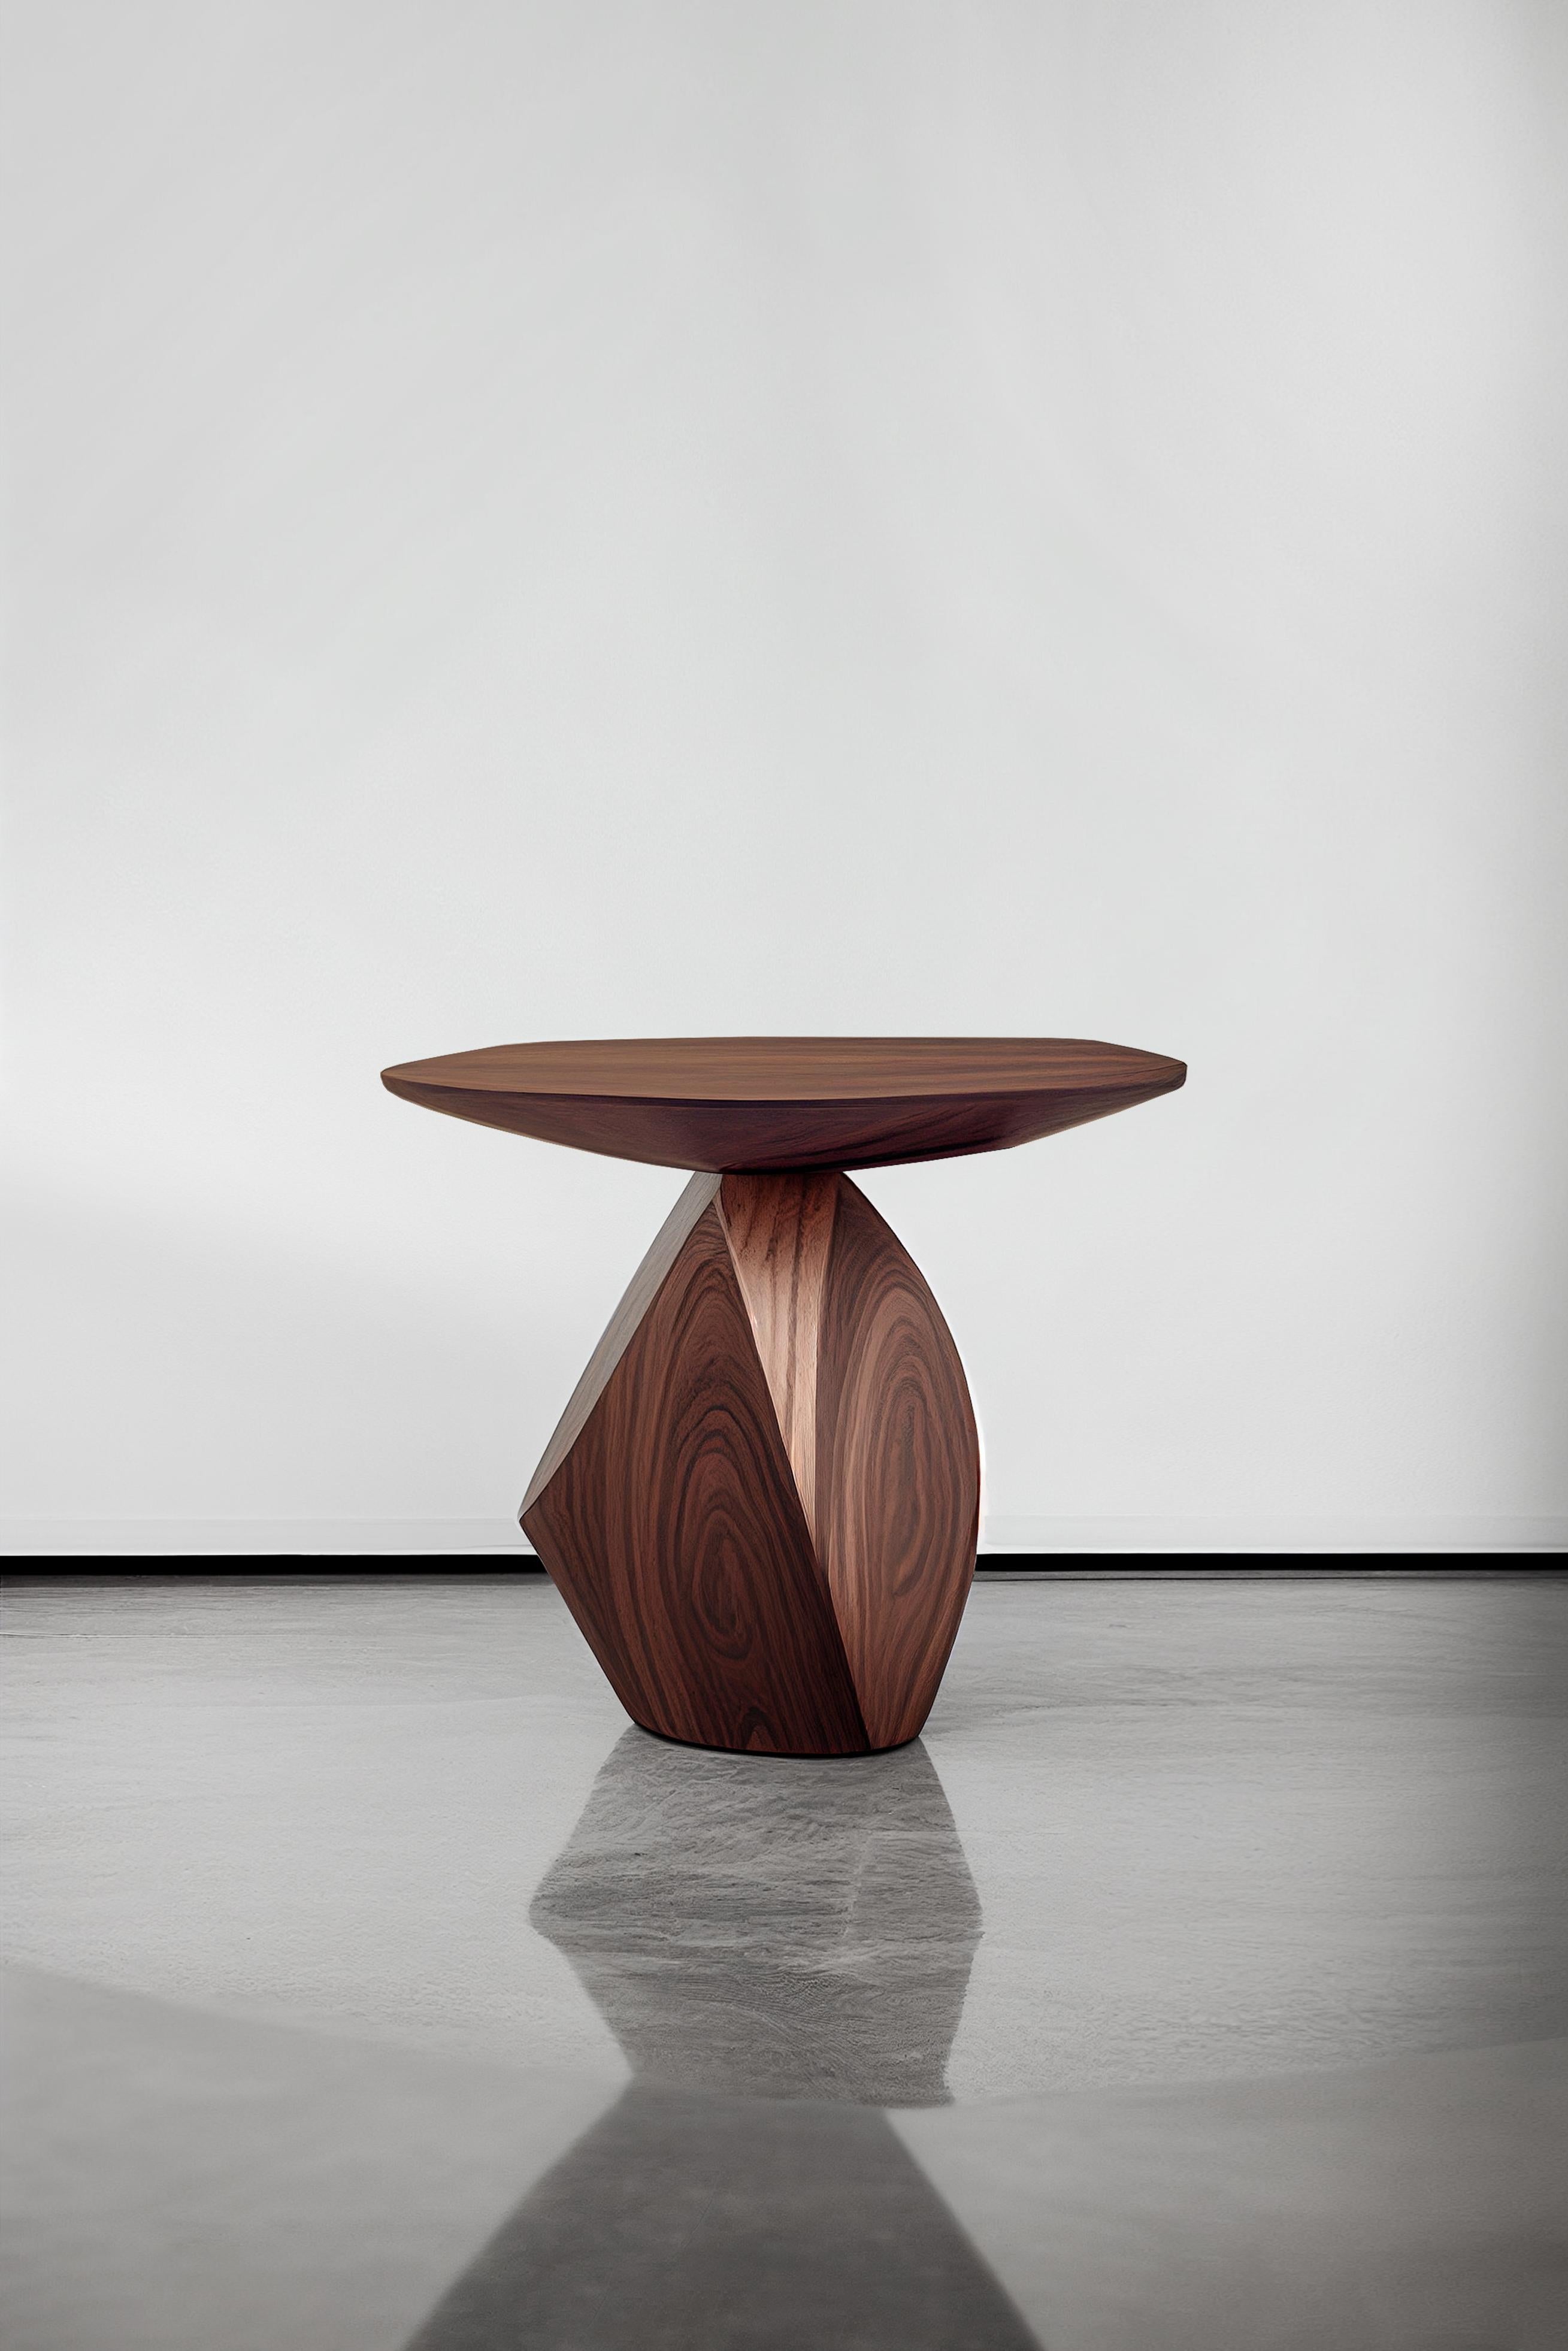 Sculptural side table made of solid walnut wood, nightstand, auxiliary table solace S3 by Joel Escalona

The Solace side table series, designed by Joel Escalona, is a furniture collection that exudes balance and presence, thanks to its sensuous,